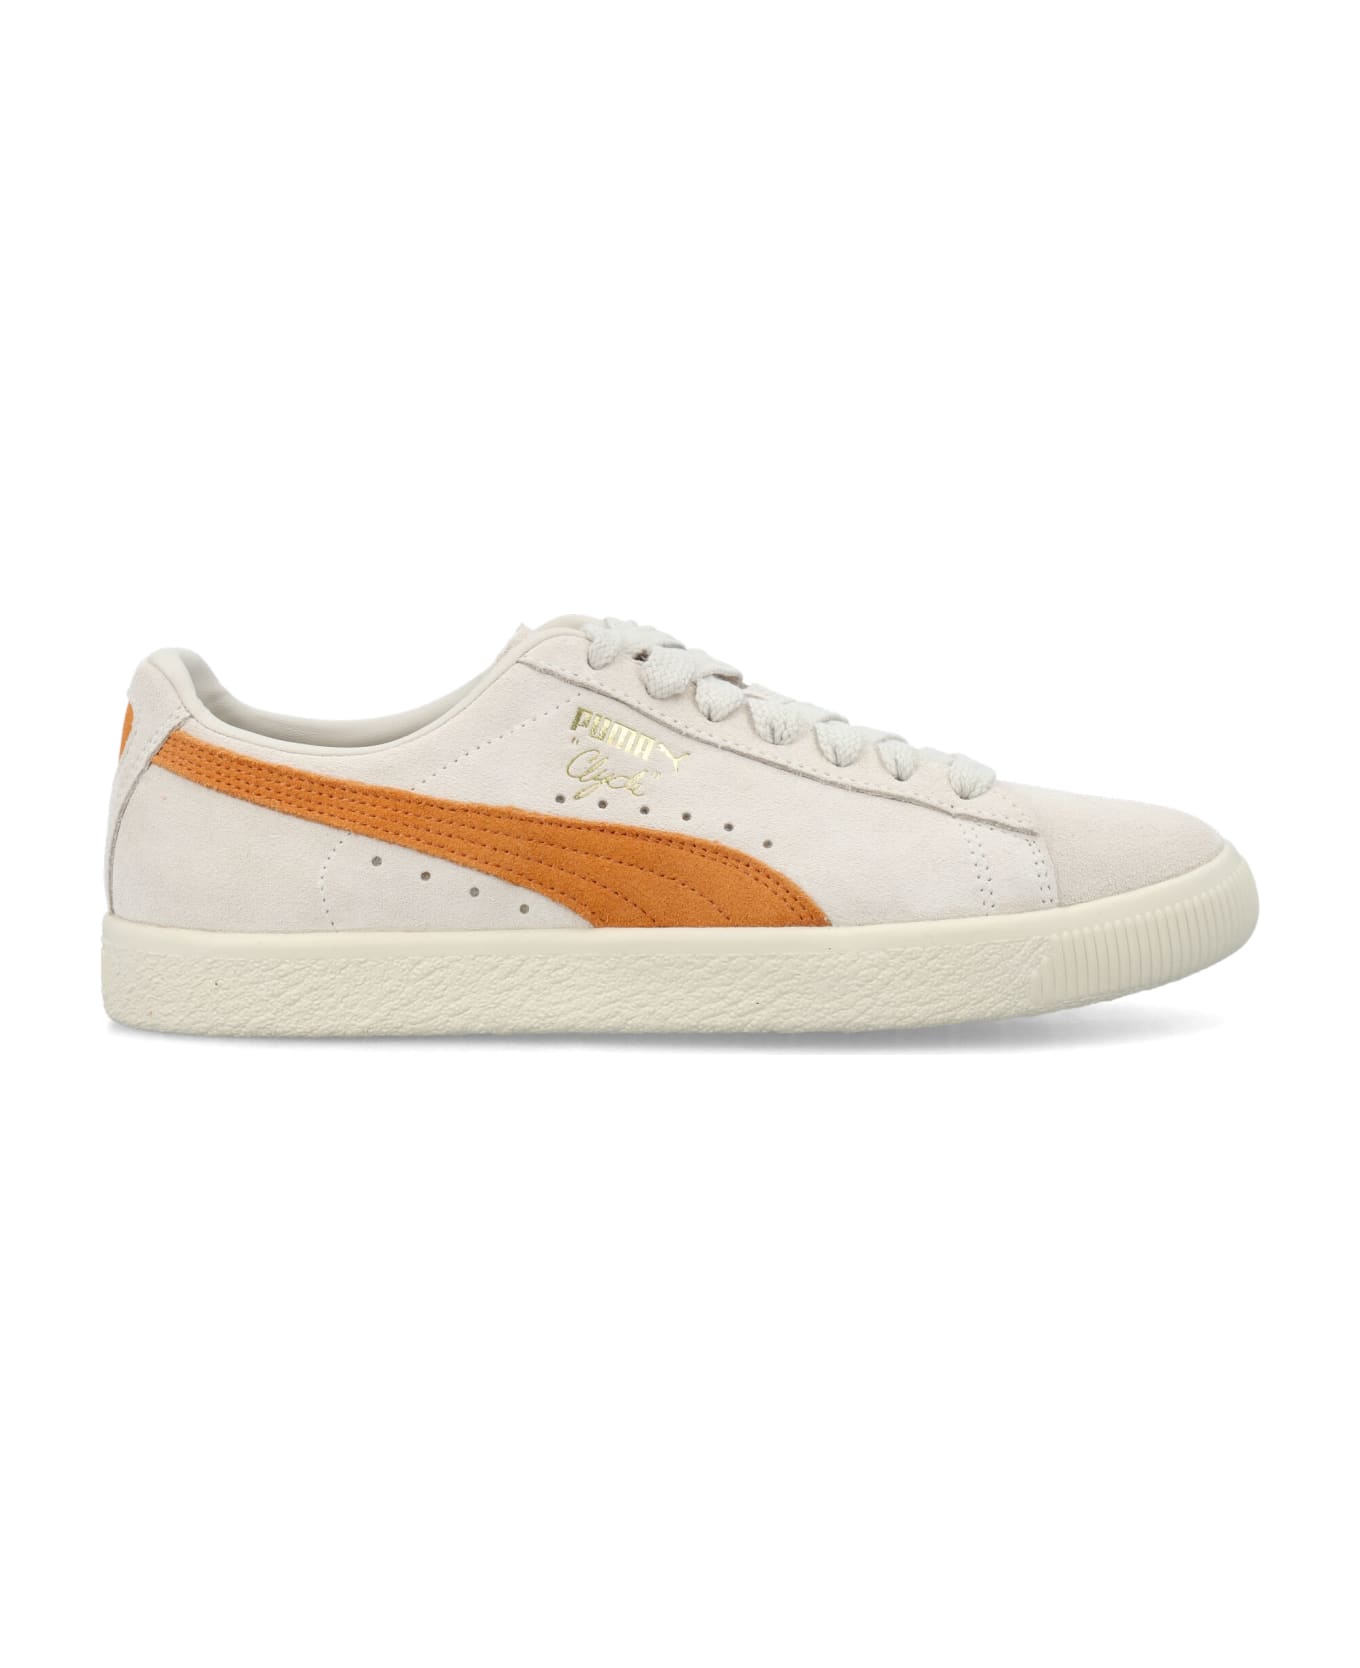 Puma Clyde Og Sneakers - FROSTED IVORY CLEMENTINE スニーカー